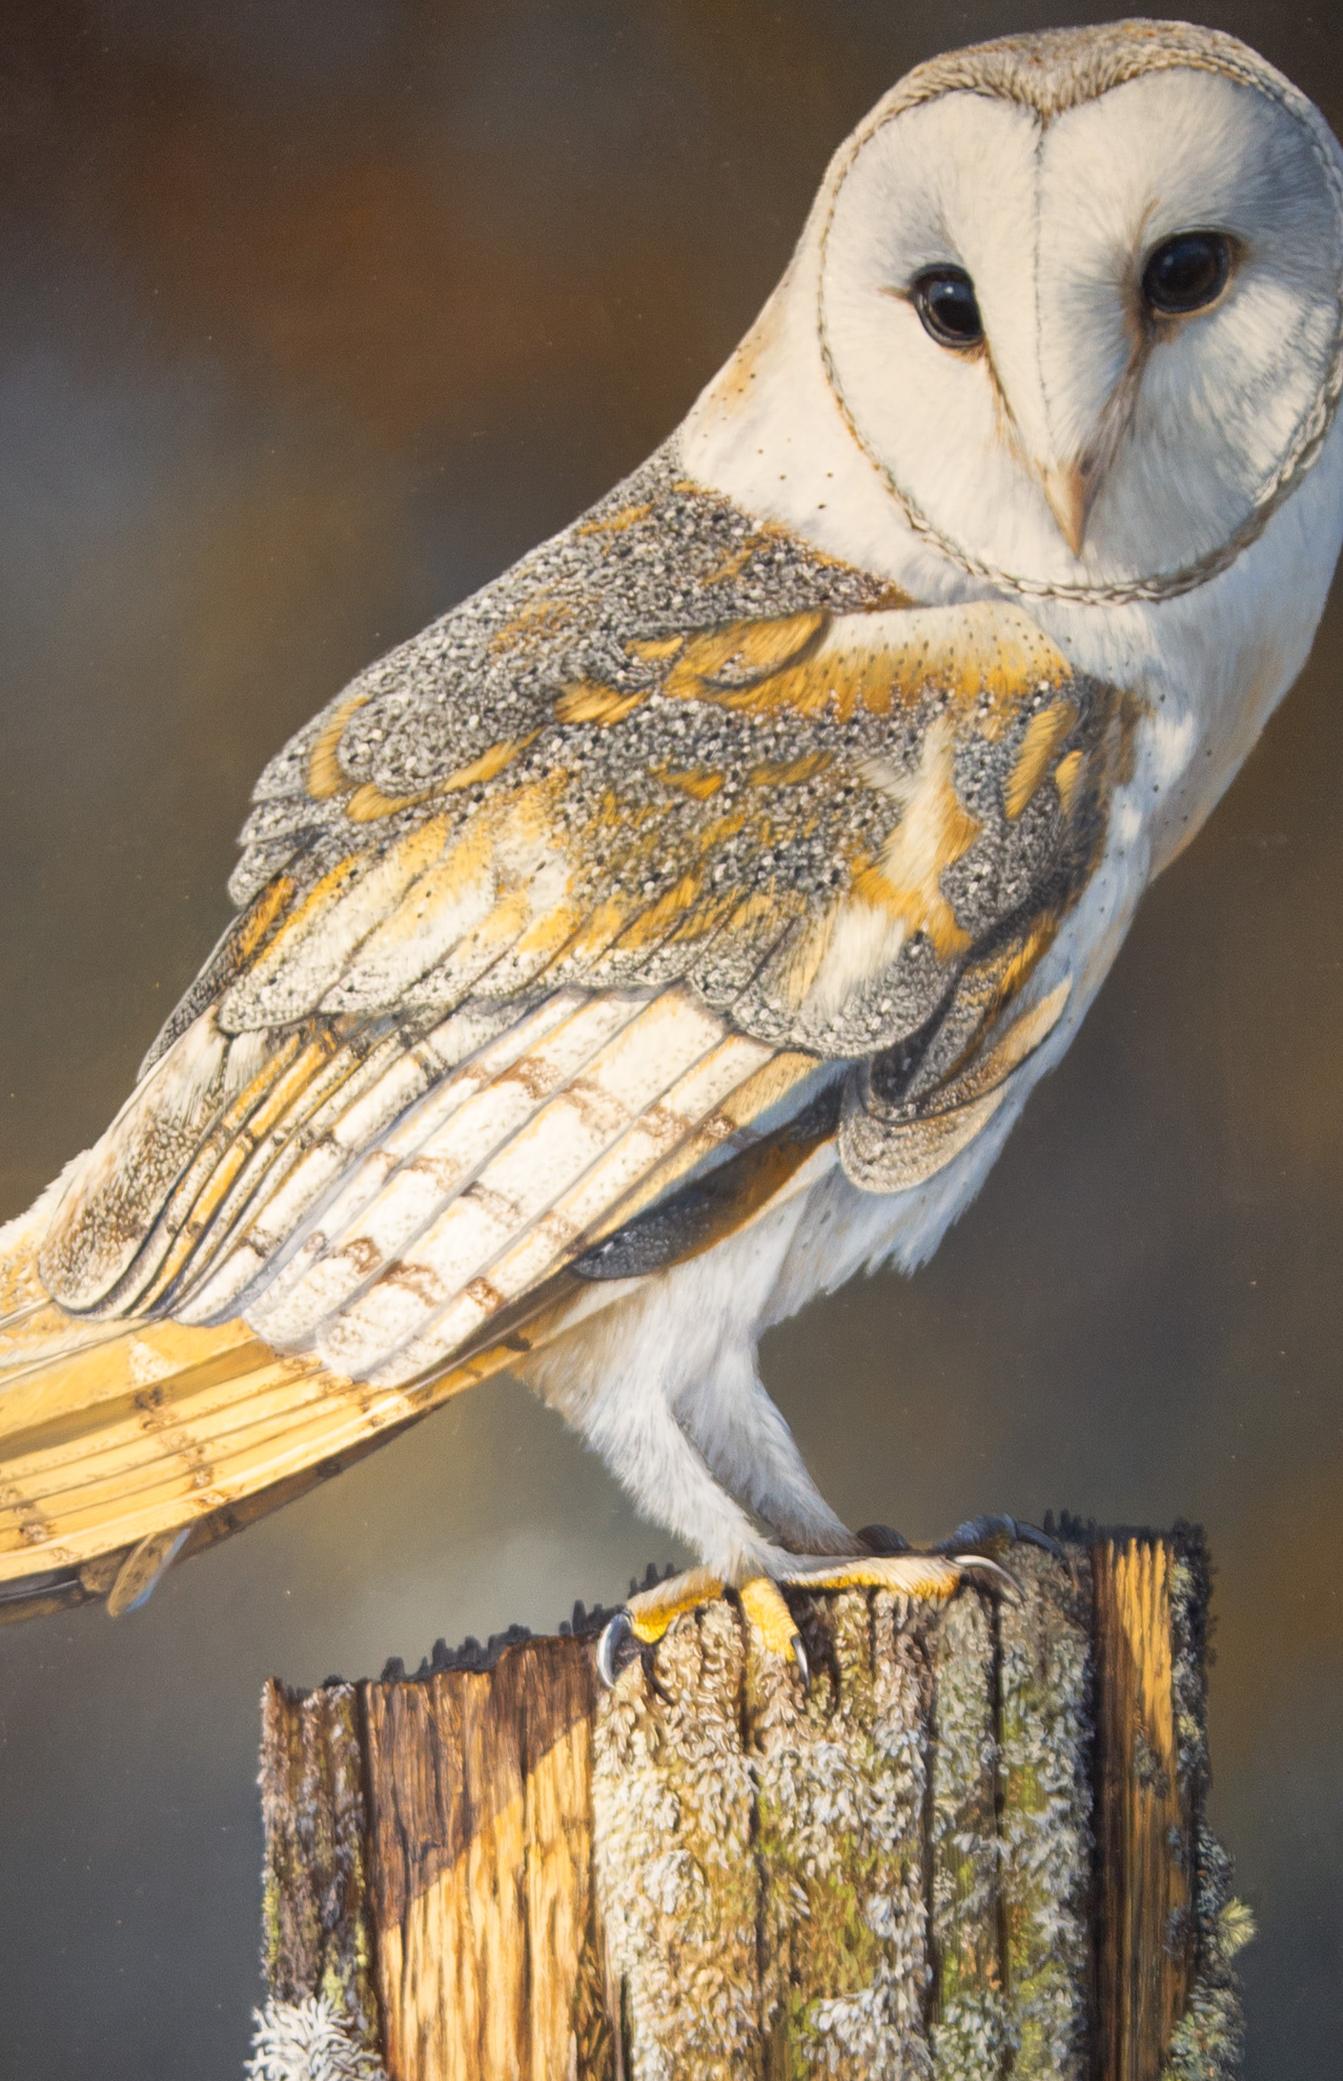 'The Watcher by Ben Waddams is a Contemporary Realist Wildlife oil painting of an English Barn Owl.  With such incredible detail you almost expect the bird to take flight!   Ben Waddams is a British wildlife artist living and working in Shropshire.